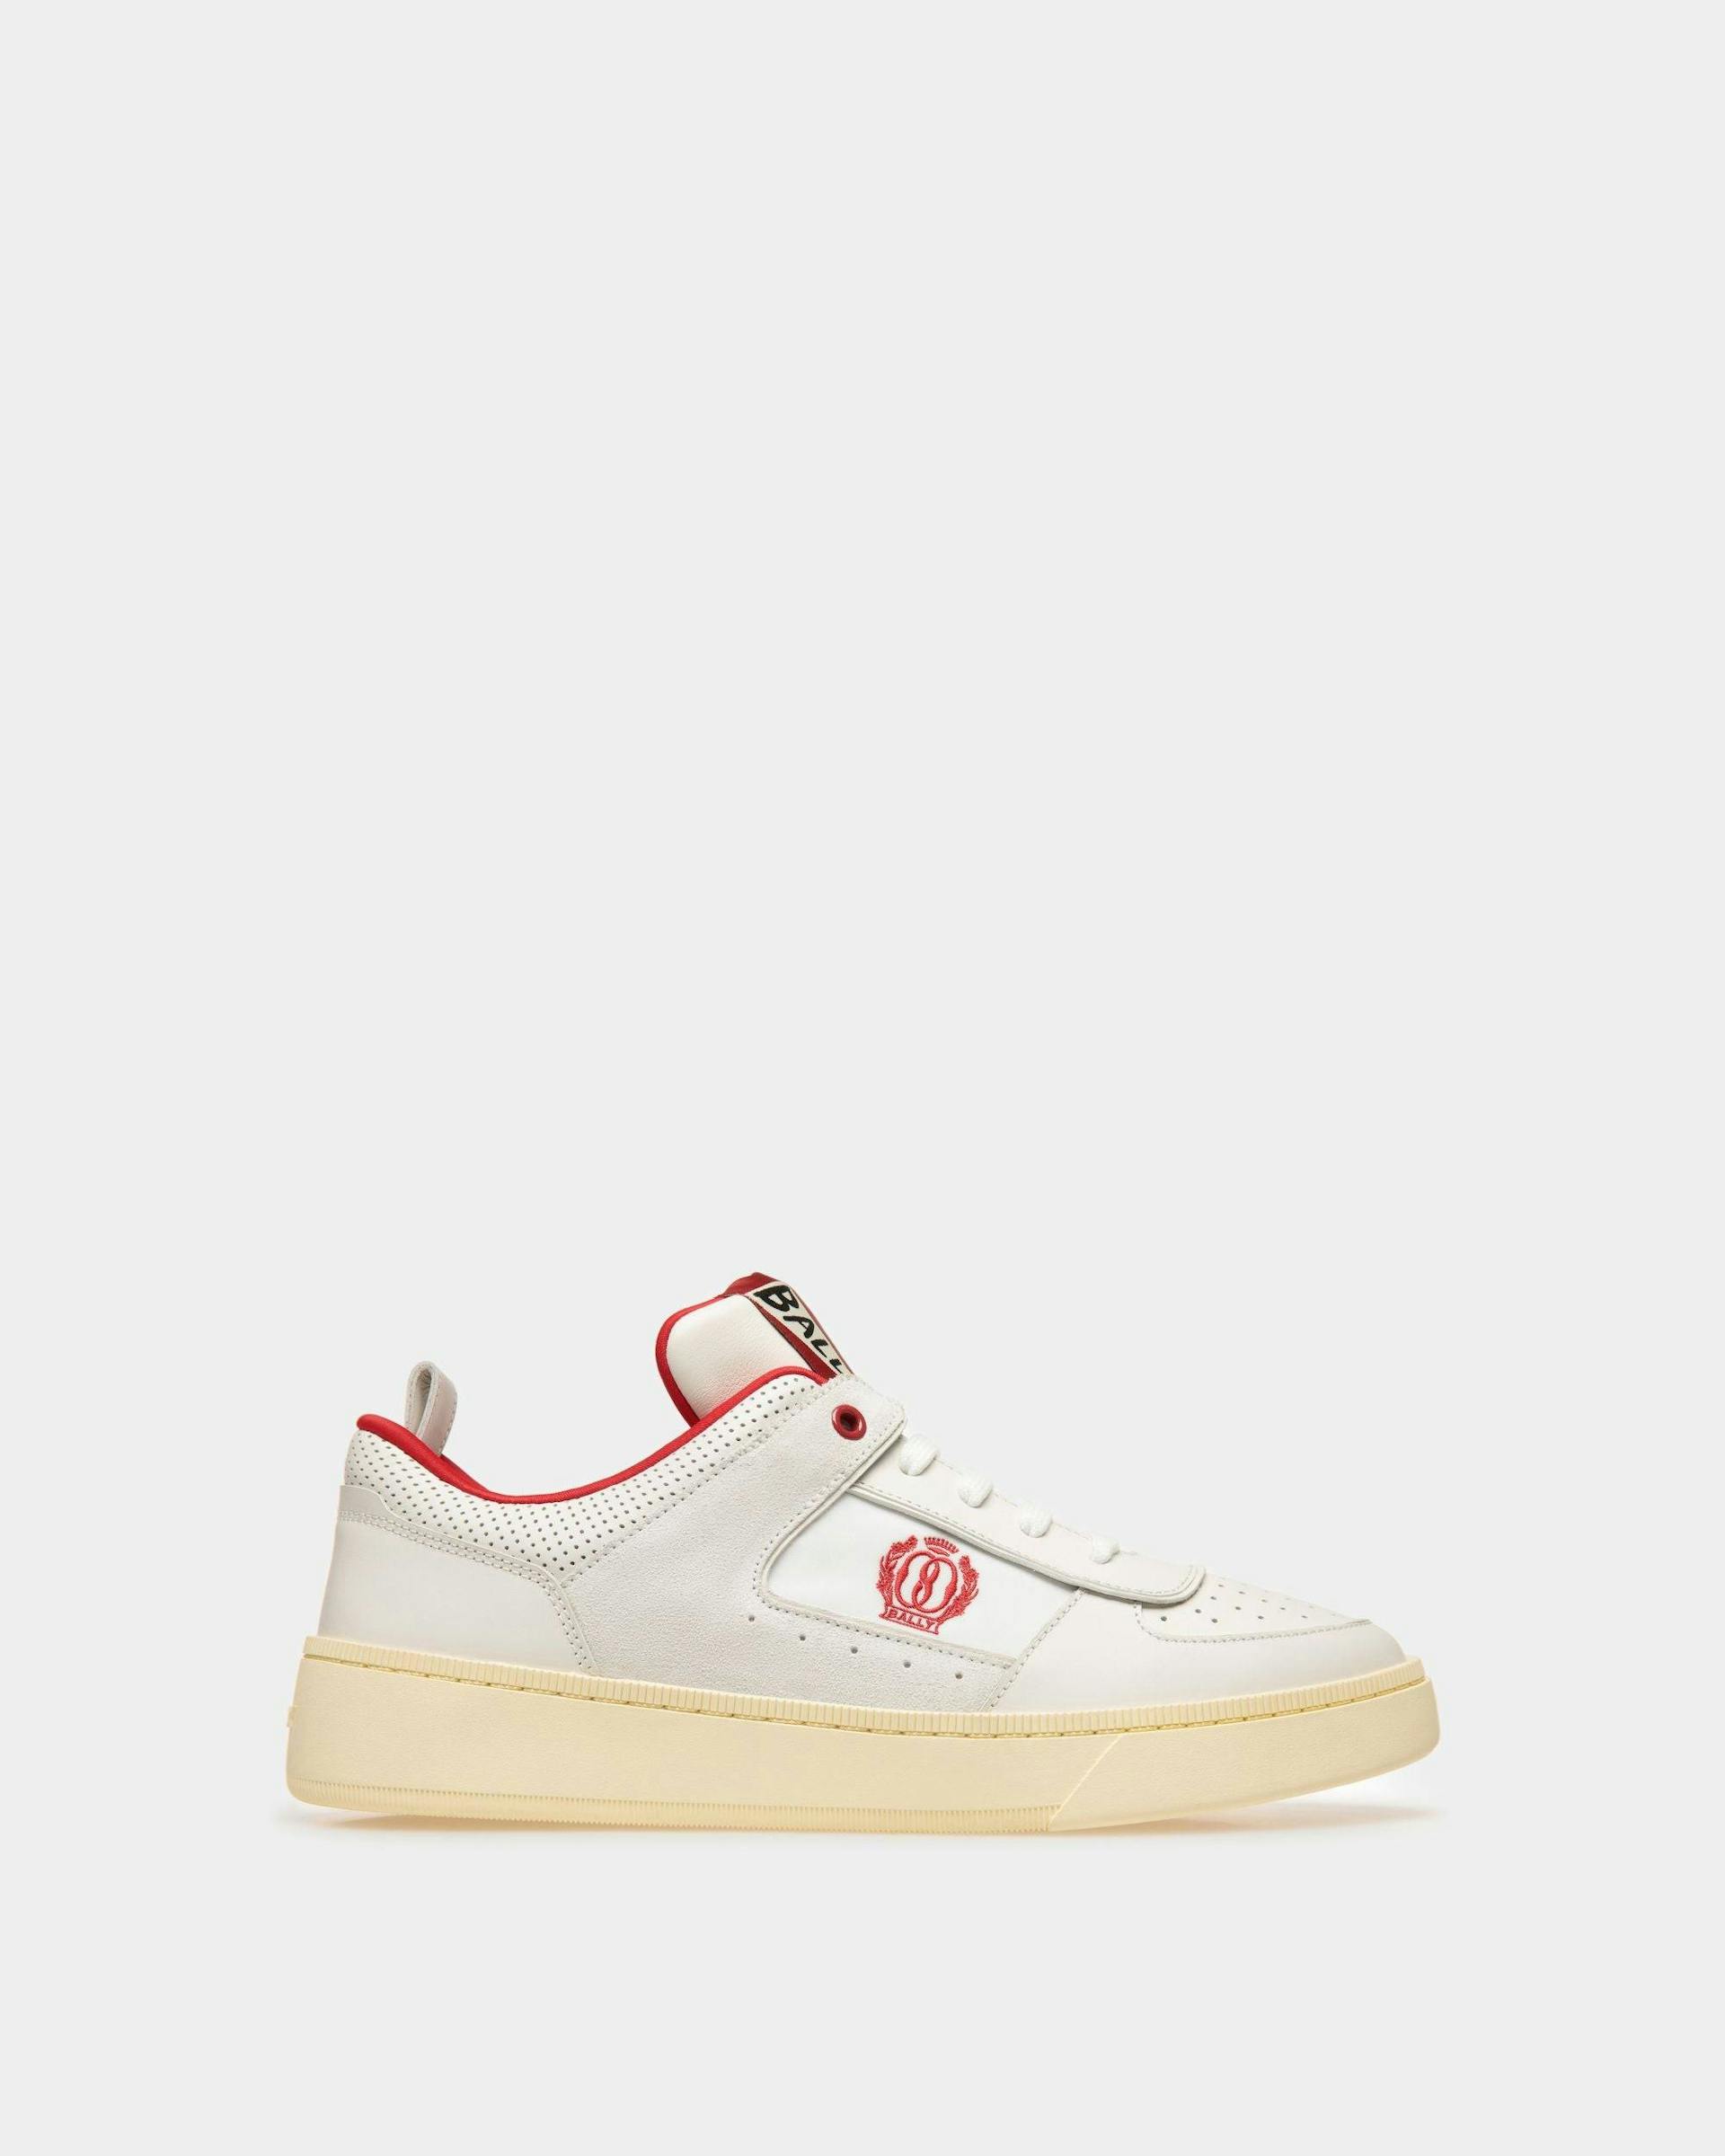 Raise Sneakers In White Leather - Men's - Bally - 01